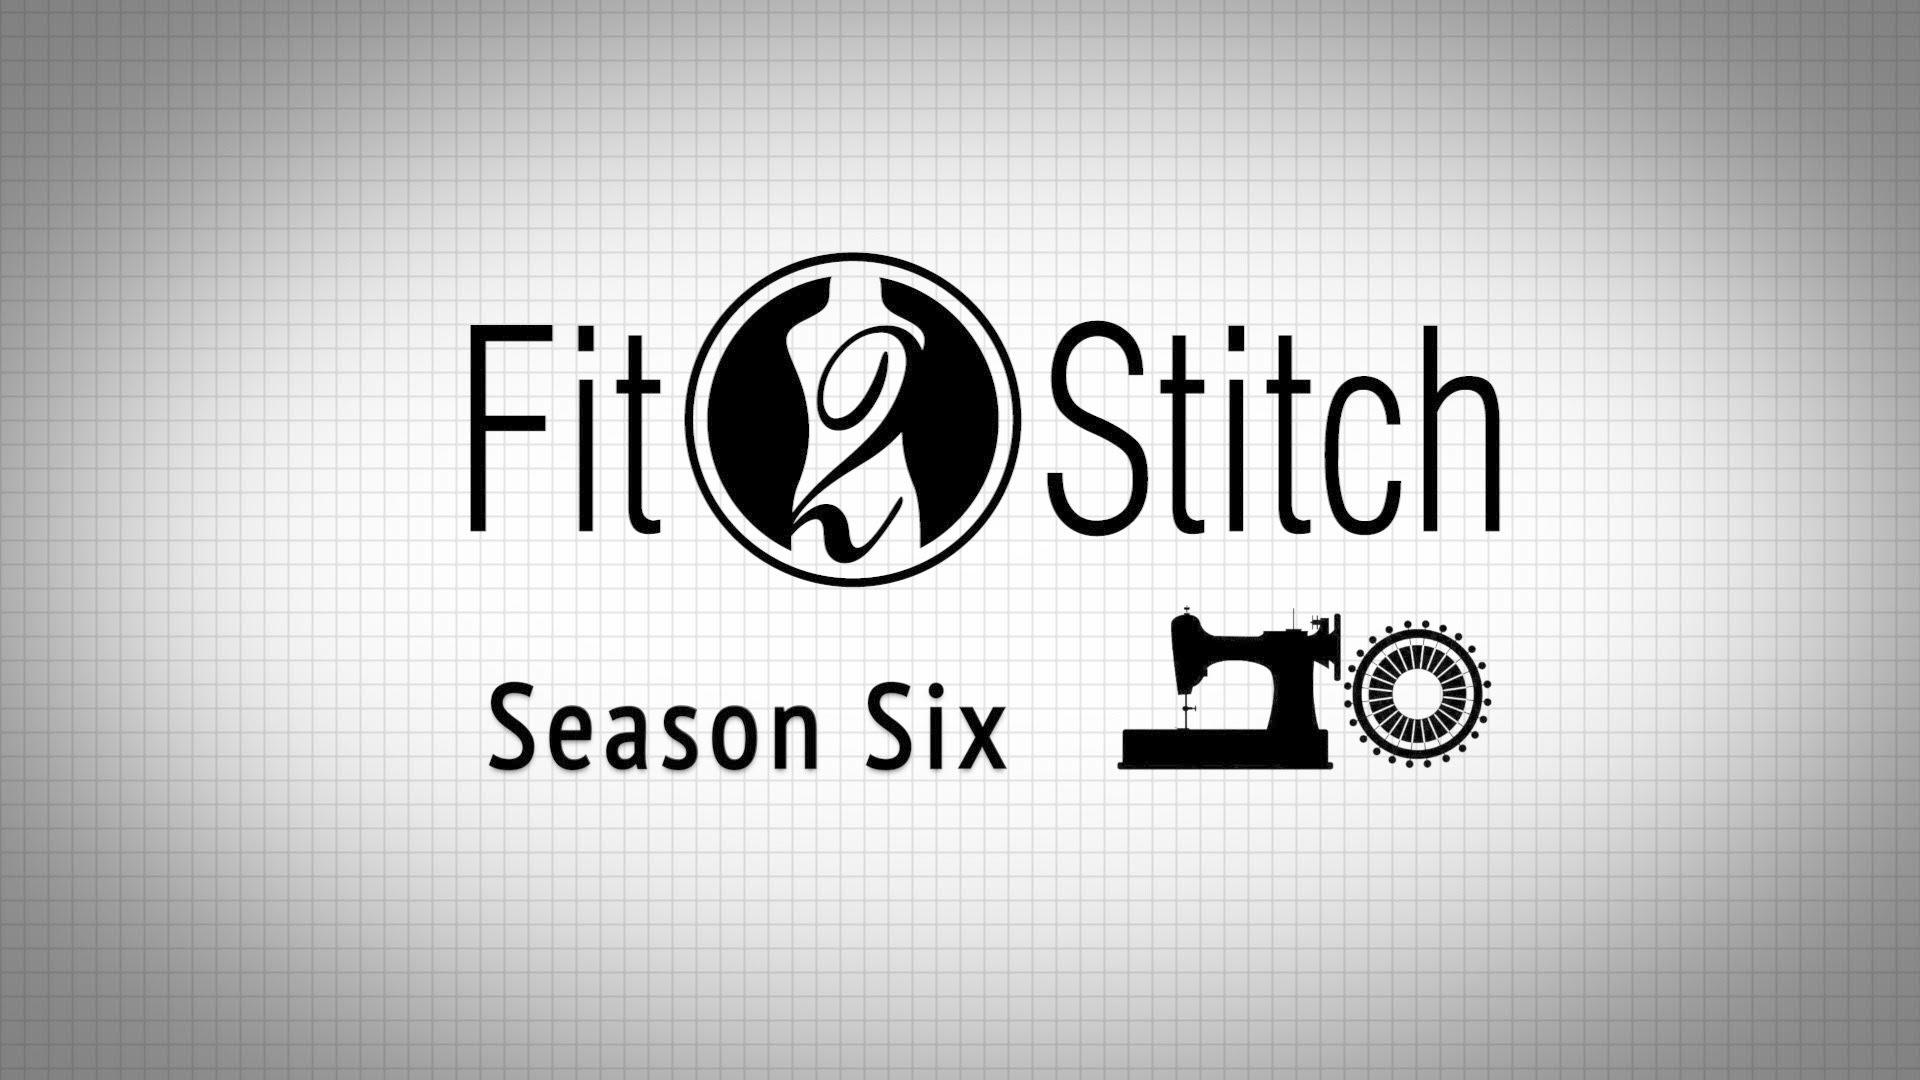 Fit 2 Stitch - Principles of Great Clothing Design - Twin Cities PBS